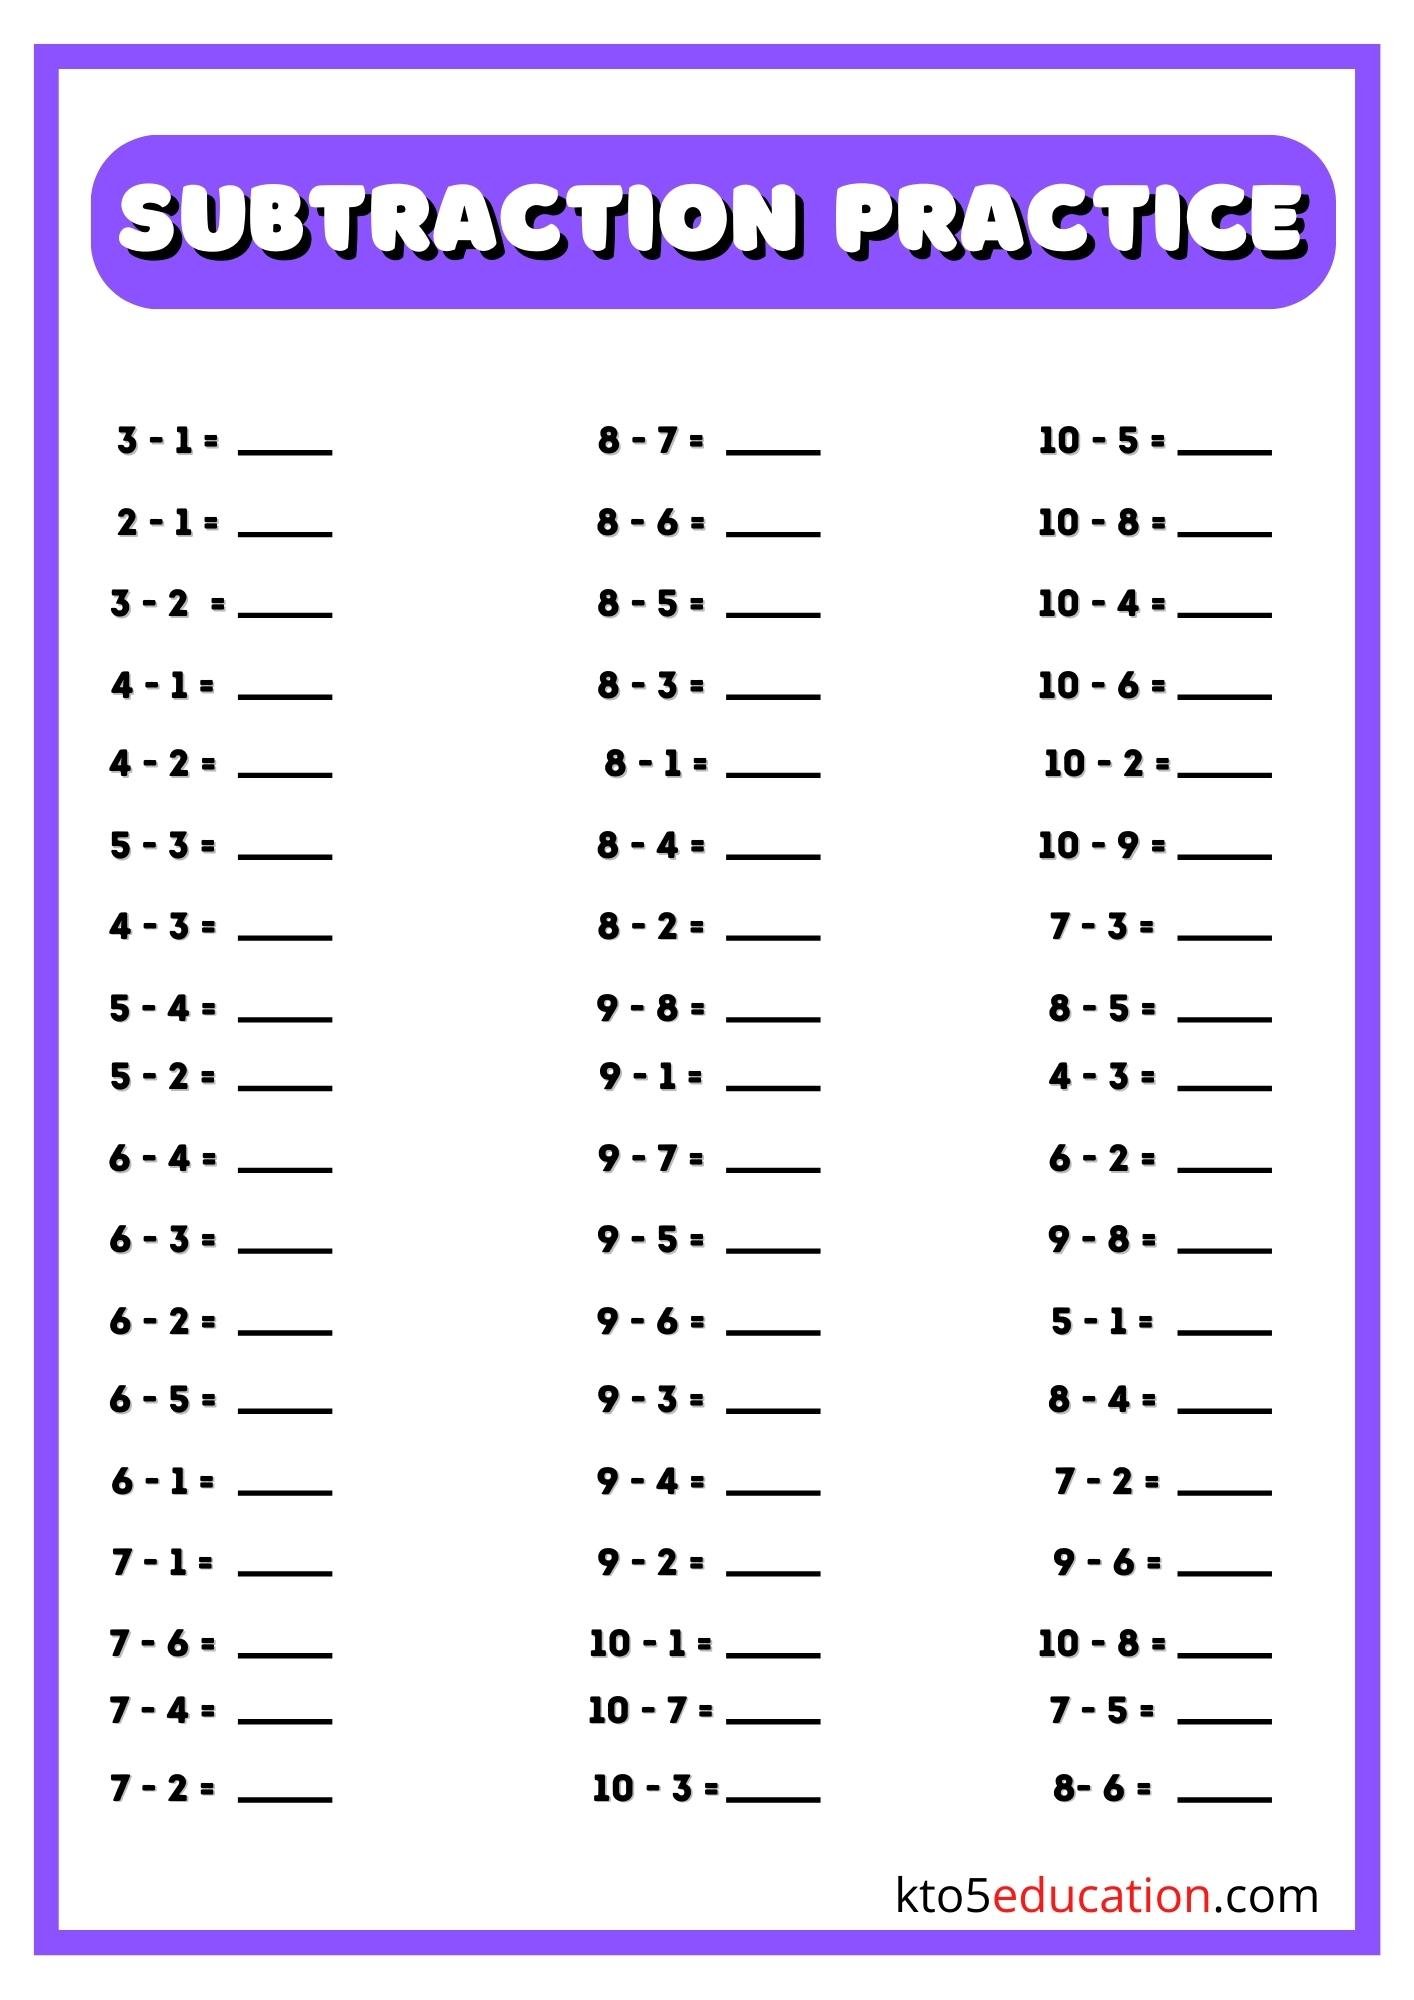 Free Worksheets Subtraction Kto5education 6829